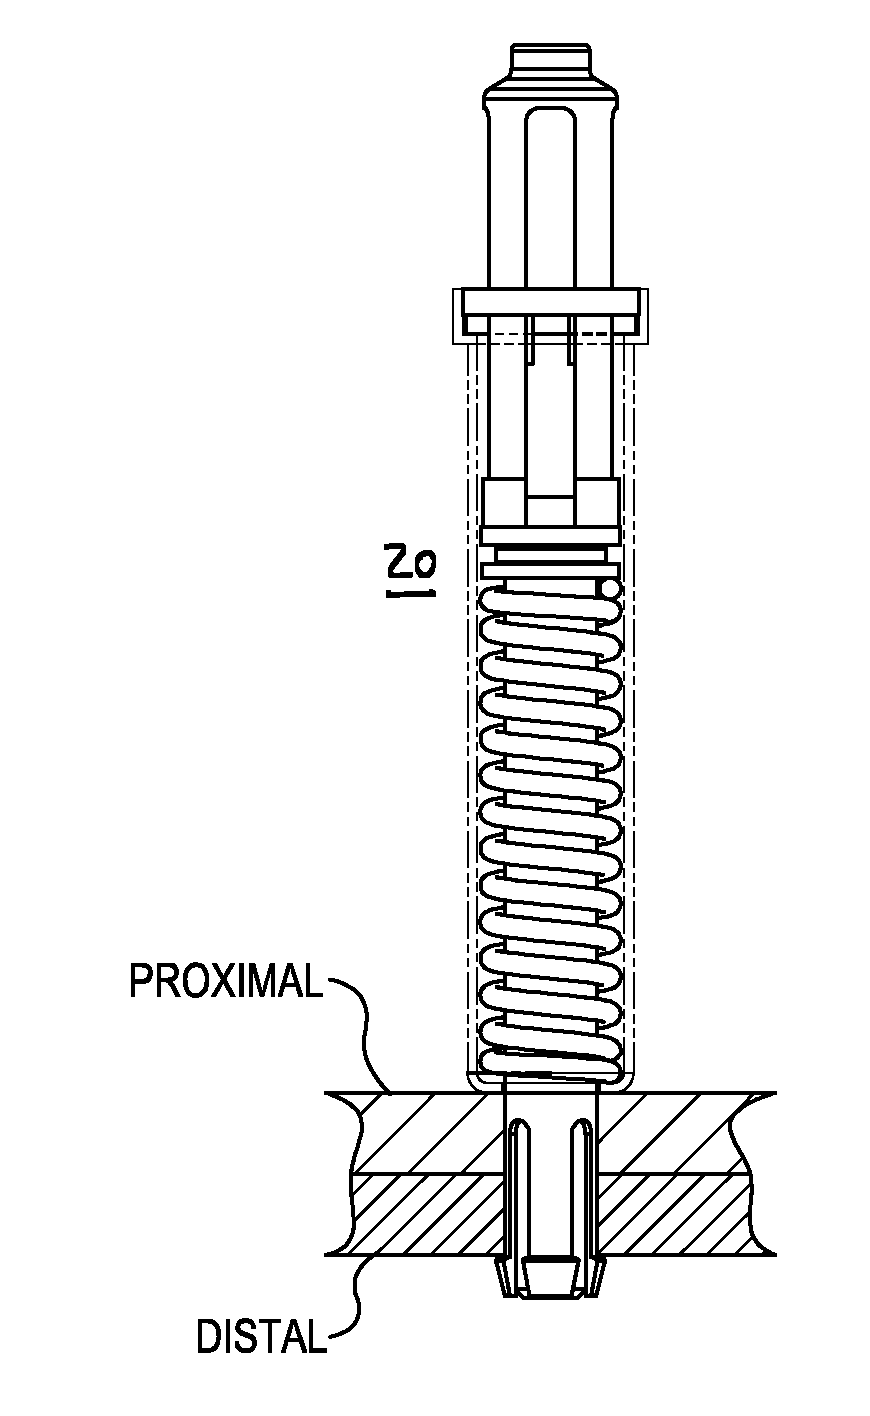 Biased blind side temporary fasteners, systems and methods